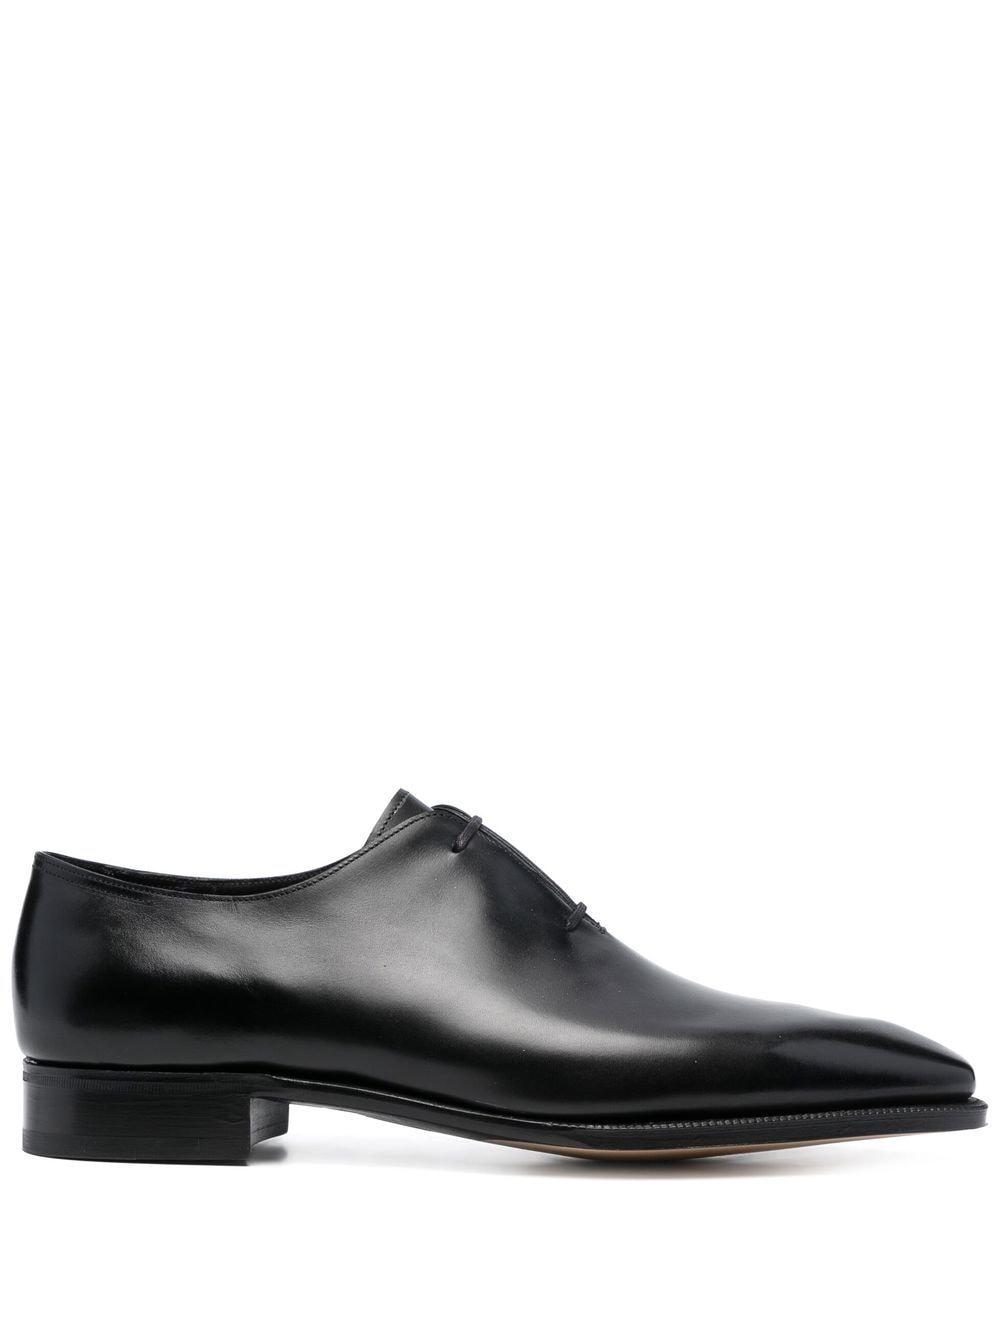 John Lobb Square-tip Leather Oxford Shoes in Black for Men | Lyst